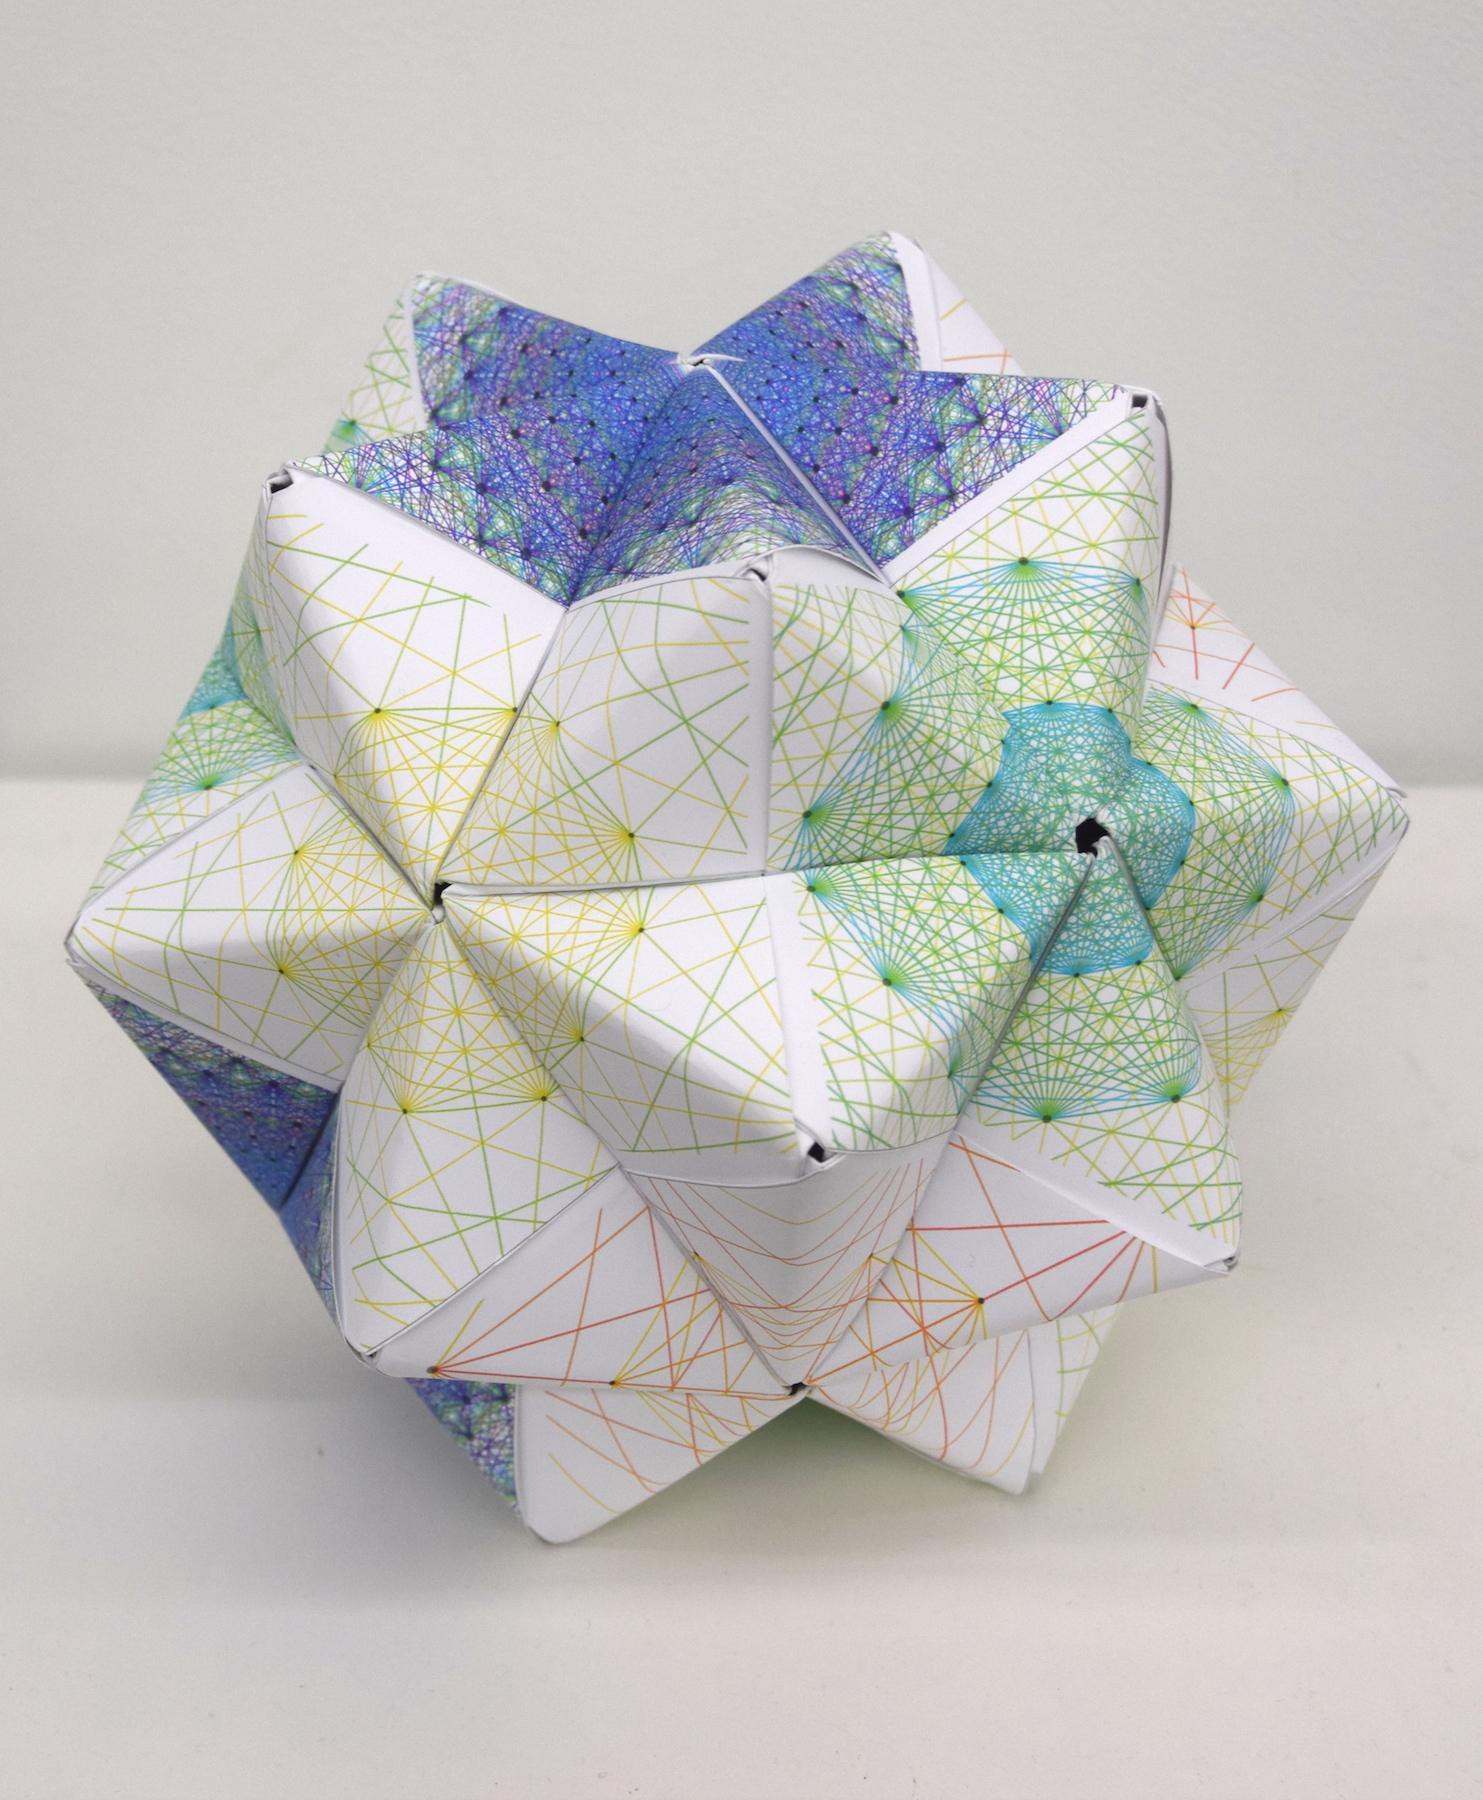 Image for entry 'Polytopic Polyhedron'